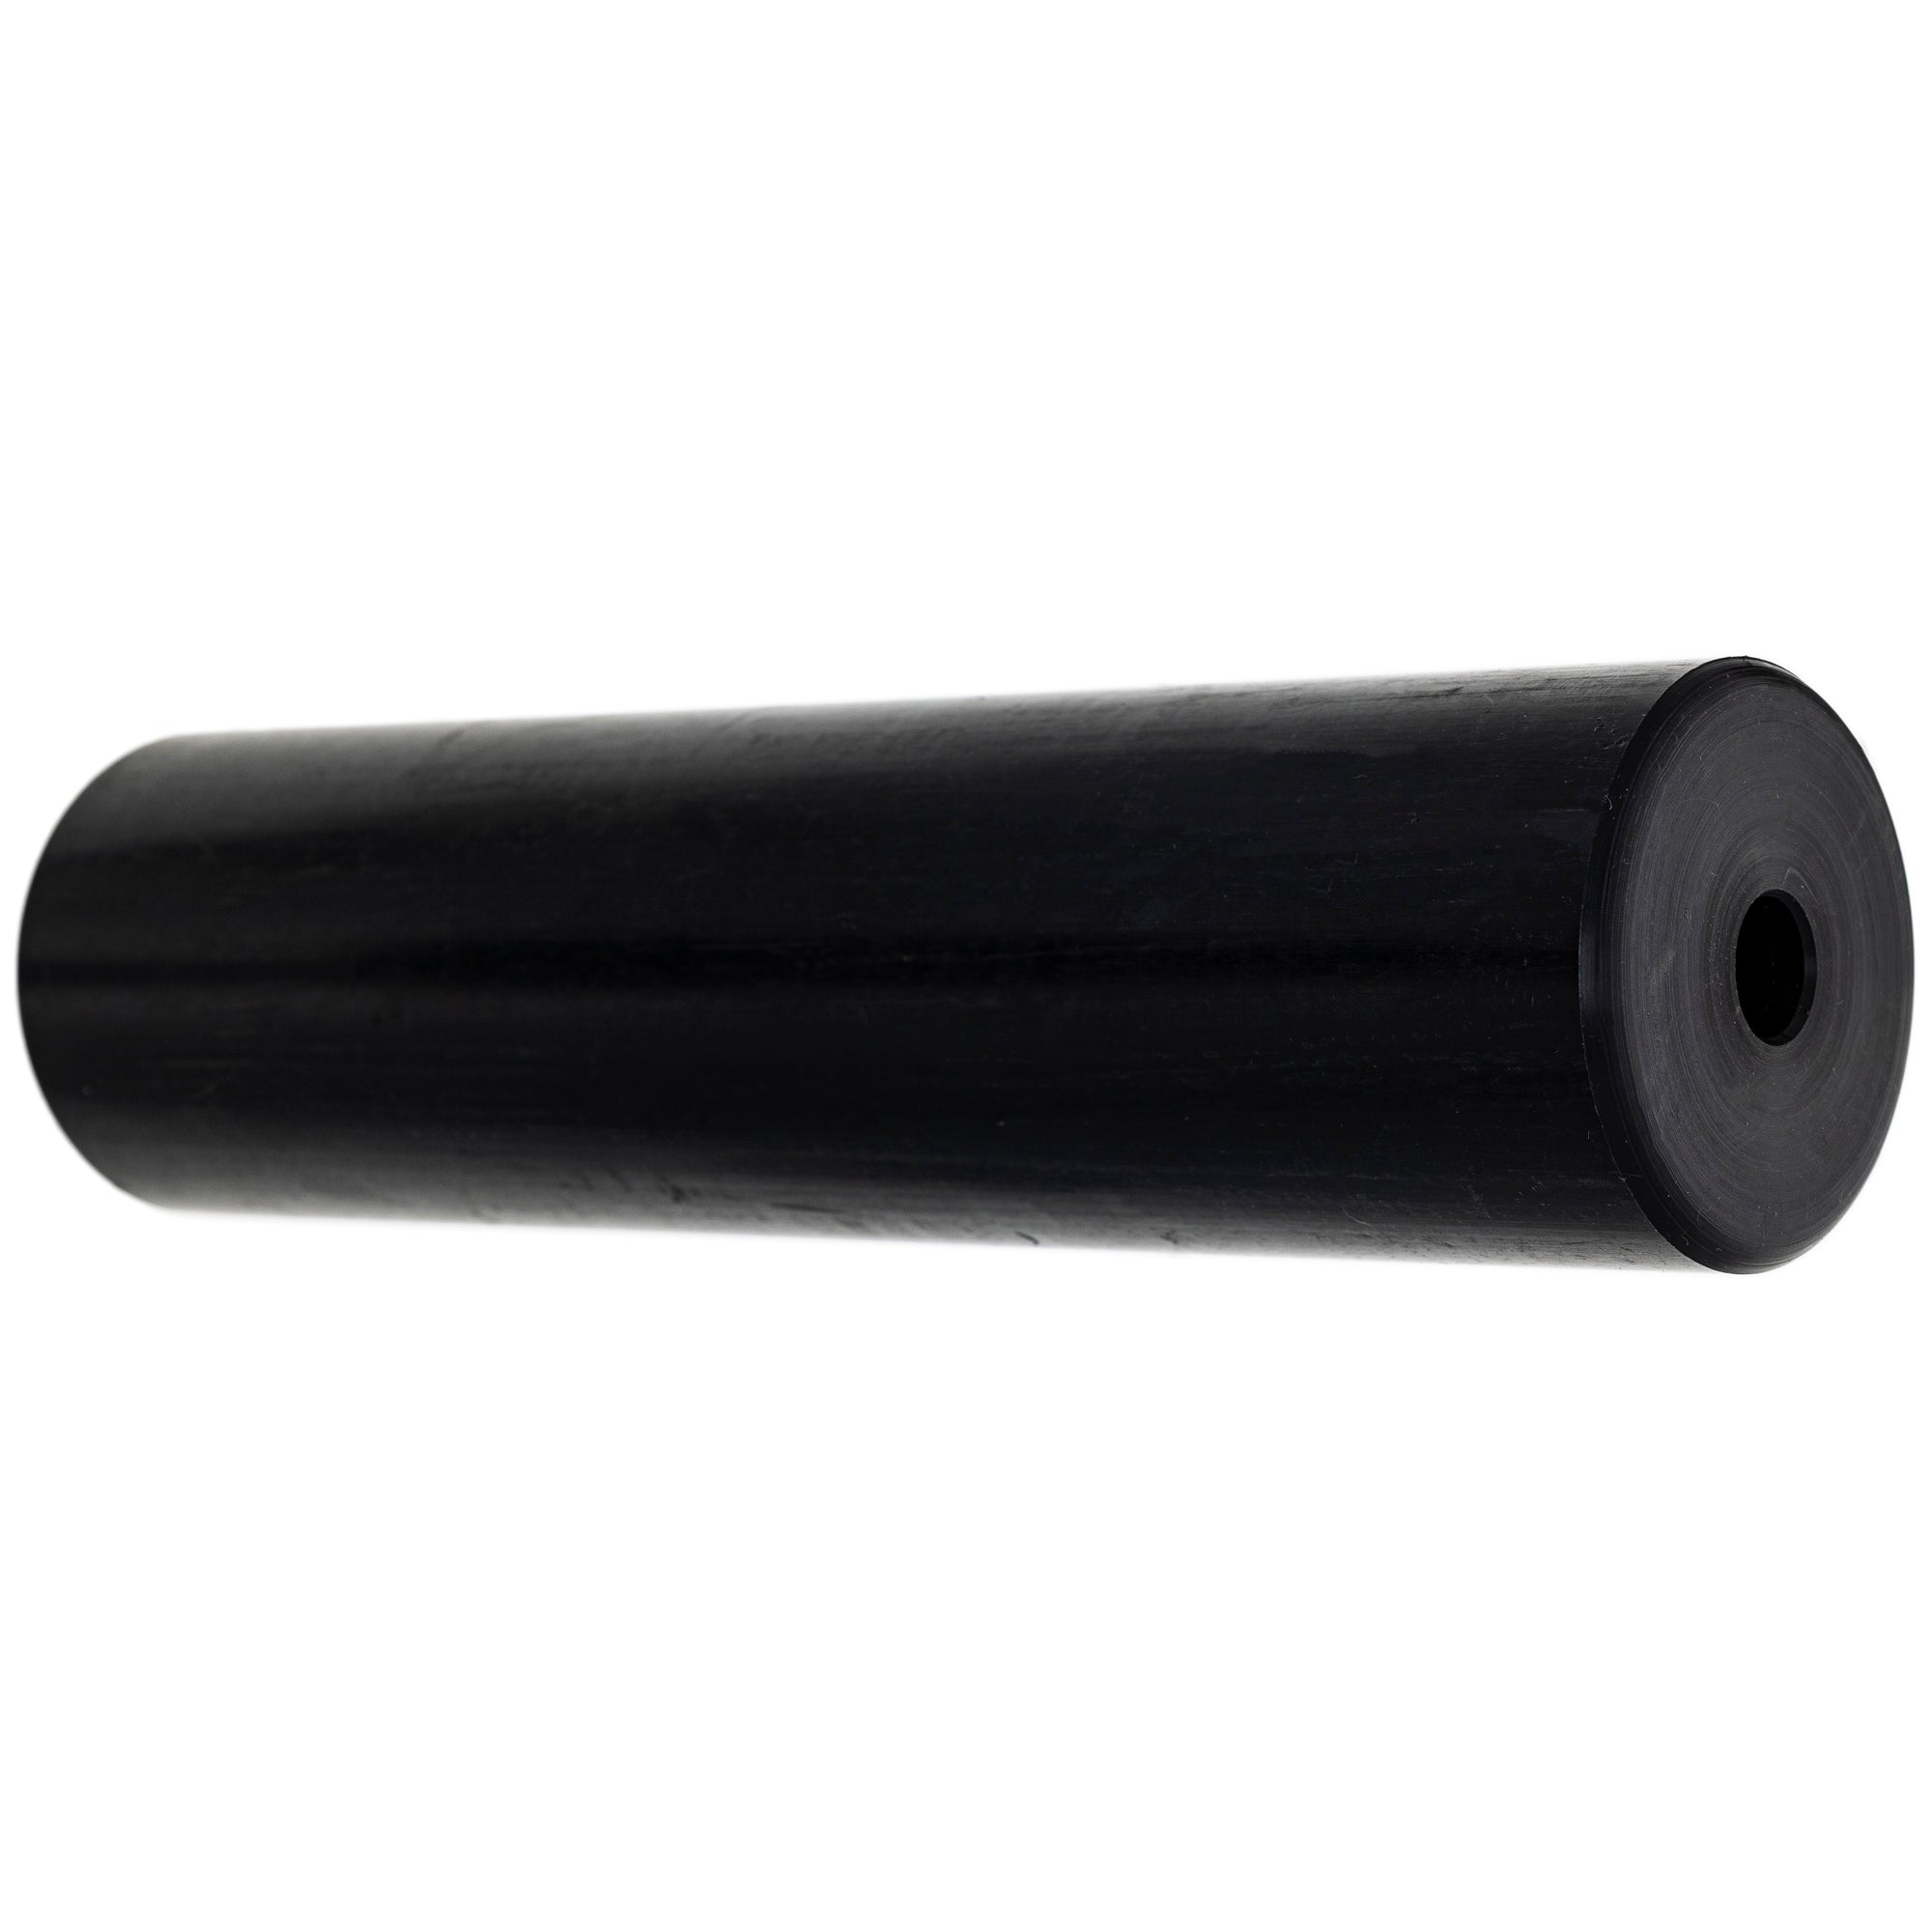 Deck Roller for Ariens Gravely 831031 03404200 42 48 60-Inch Deck 2 Pack